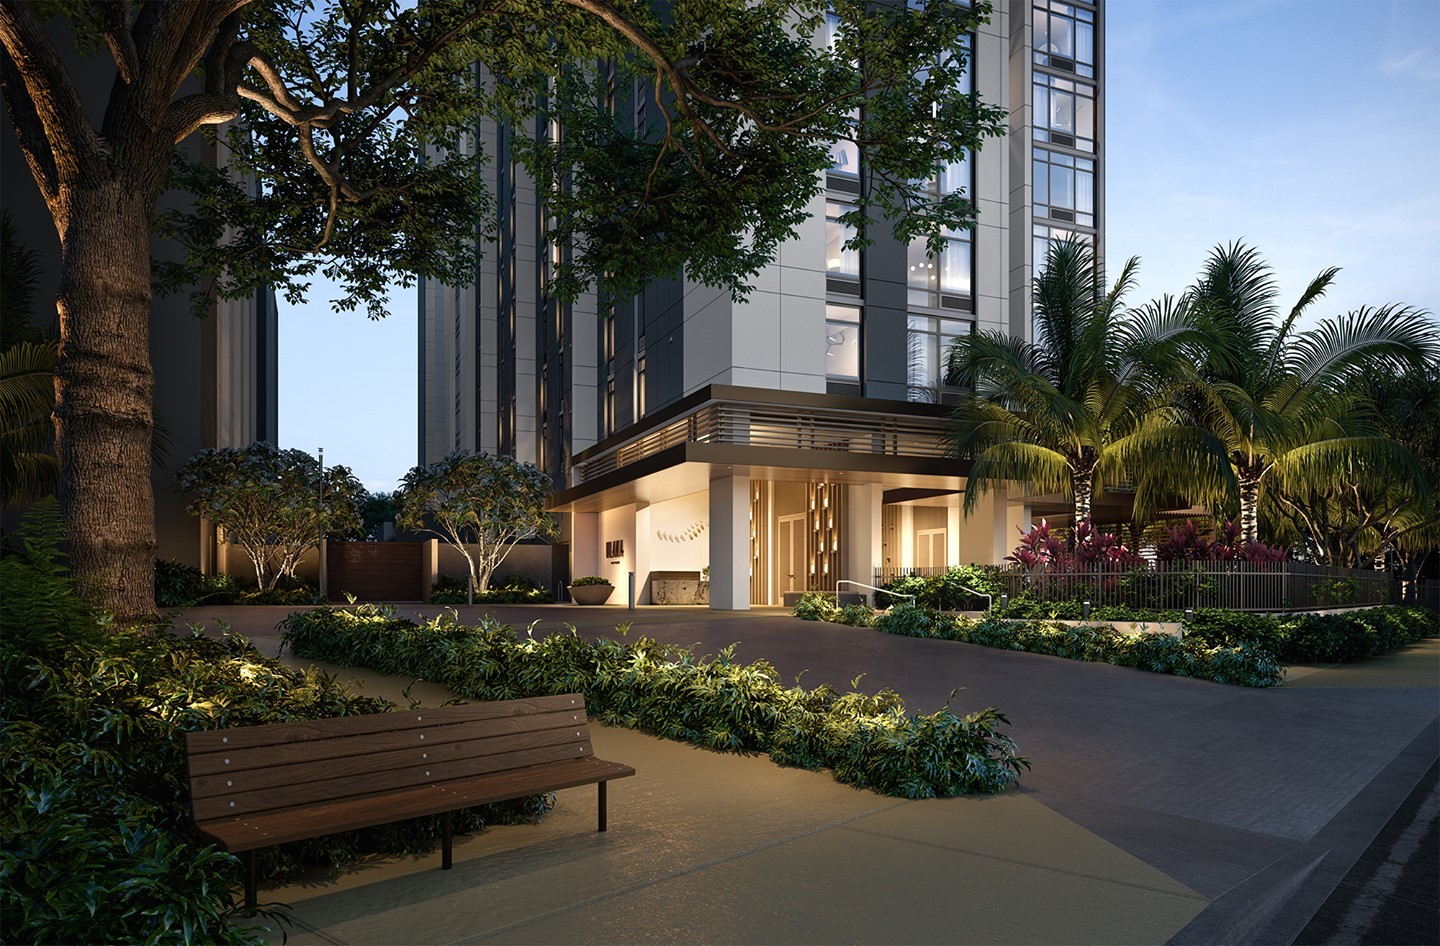 Introducing Ulana, a reserved housing offering in Ward Village. Make your home in the heart of town and enjoy interiors that feature modern touches with island sensibilities, including views from mauka to makai. Learn more in our link in bio.